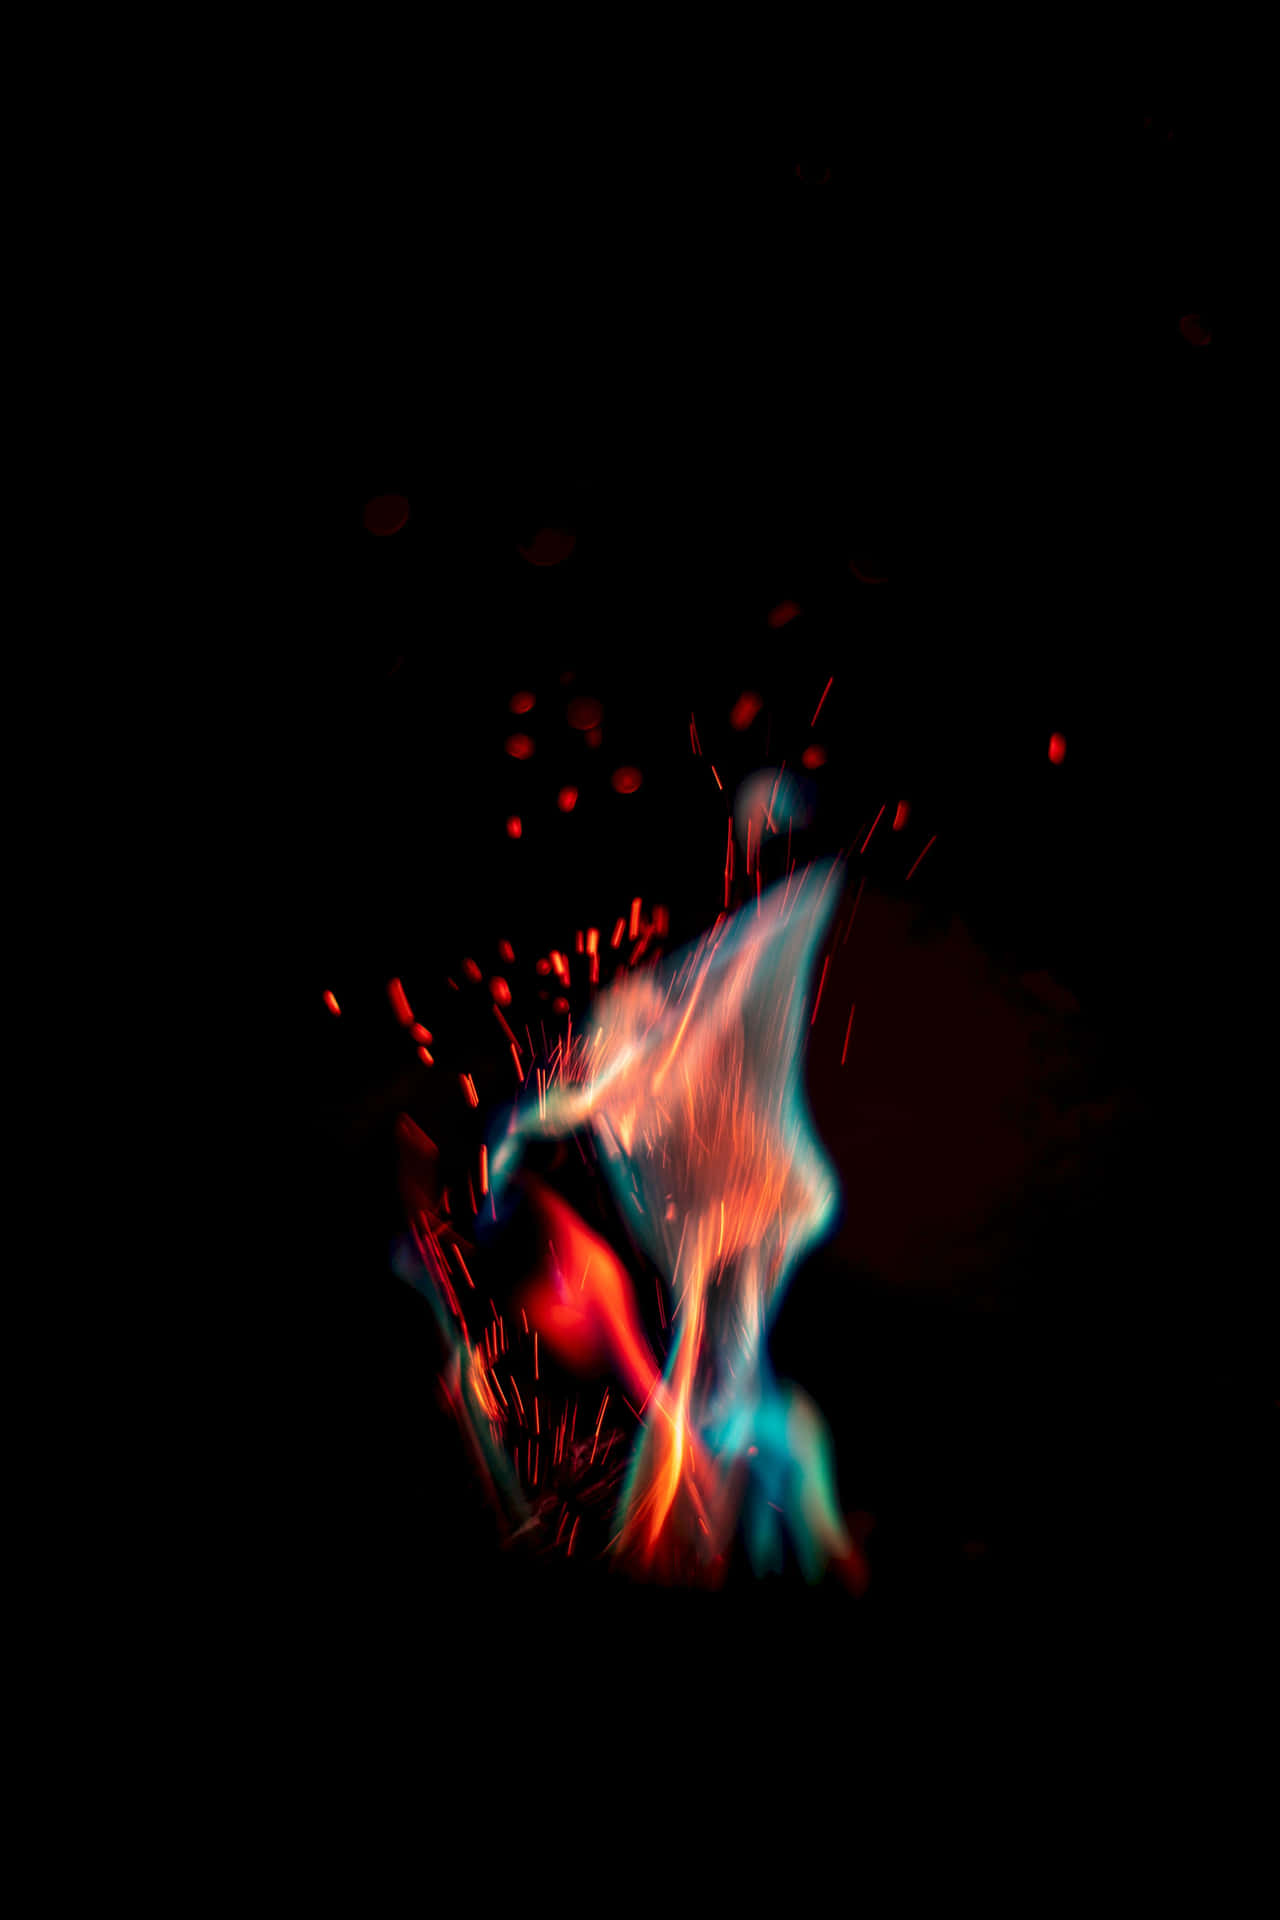 "The Contrast of Red and Blue Fire" Wallpaper